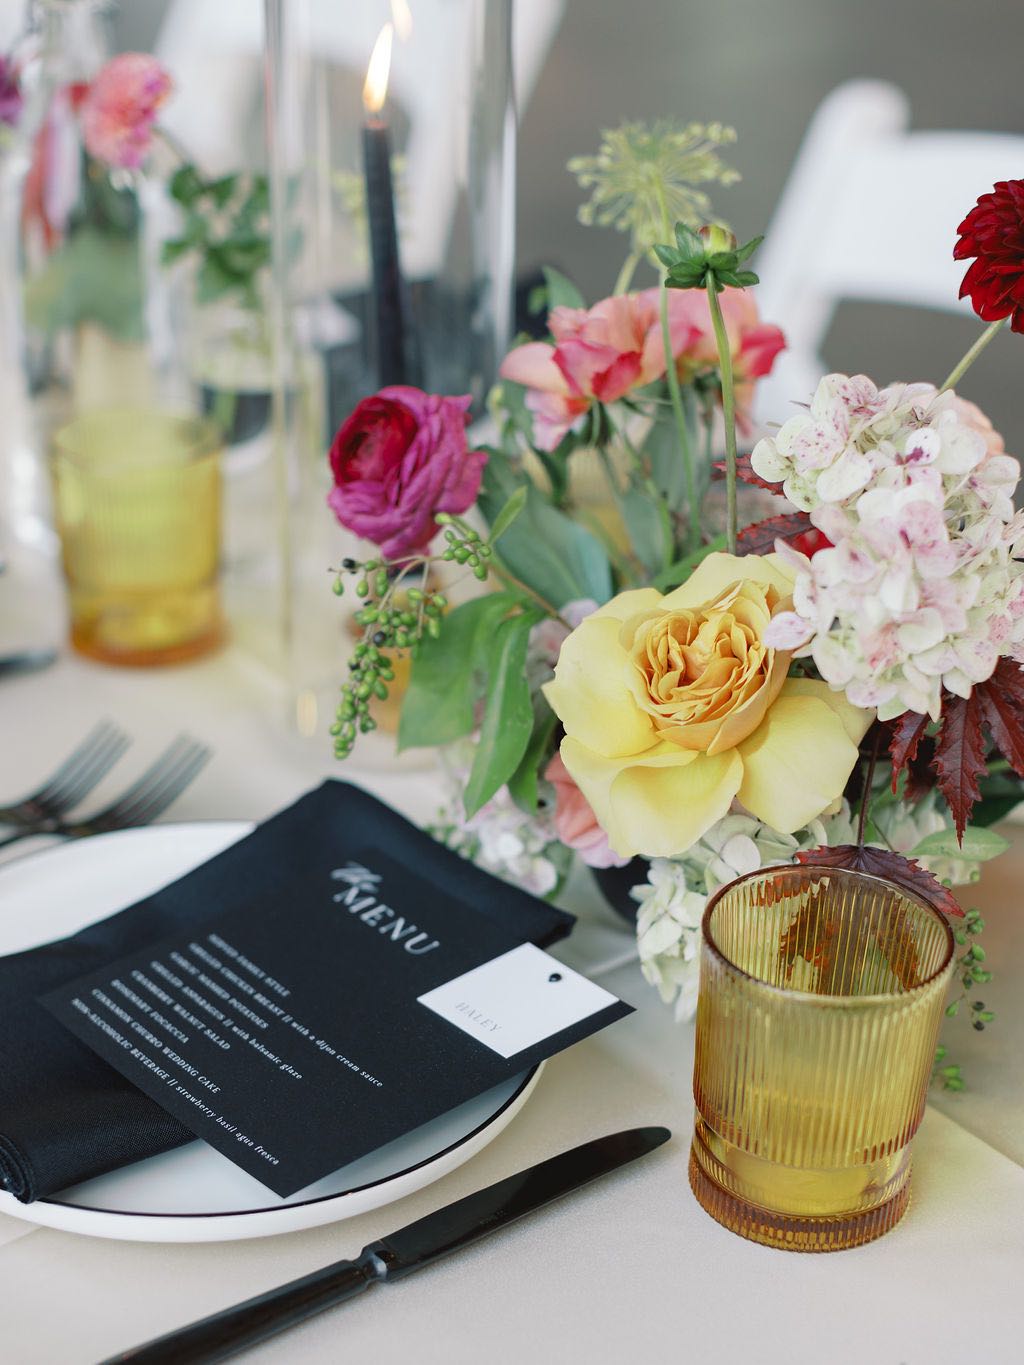 Wedding place setting with black napkin, menu and flatware and amber glassware. Colorful flowers down the center